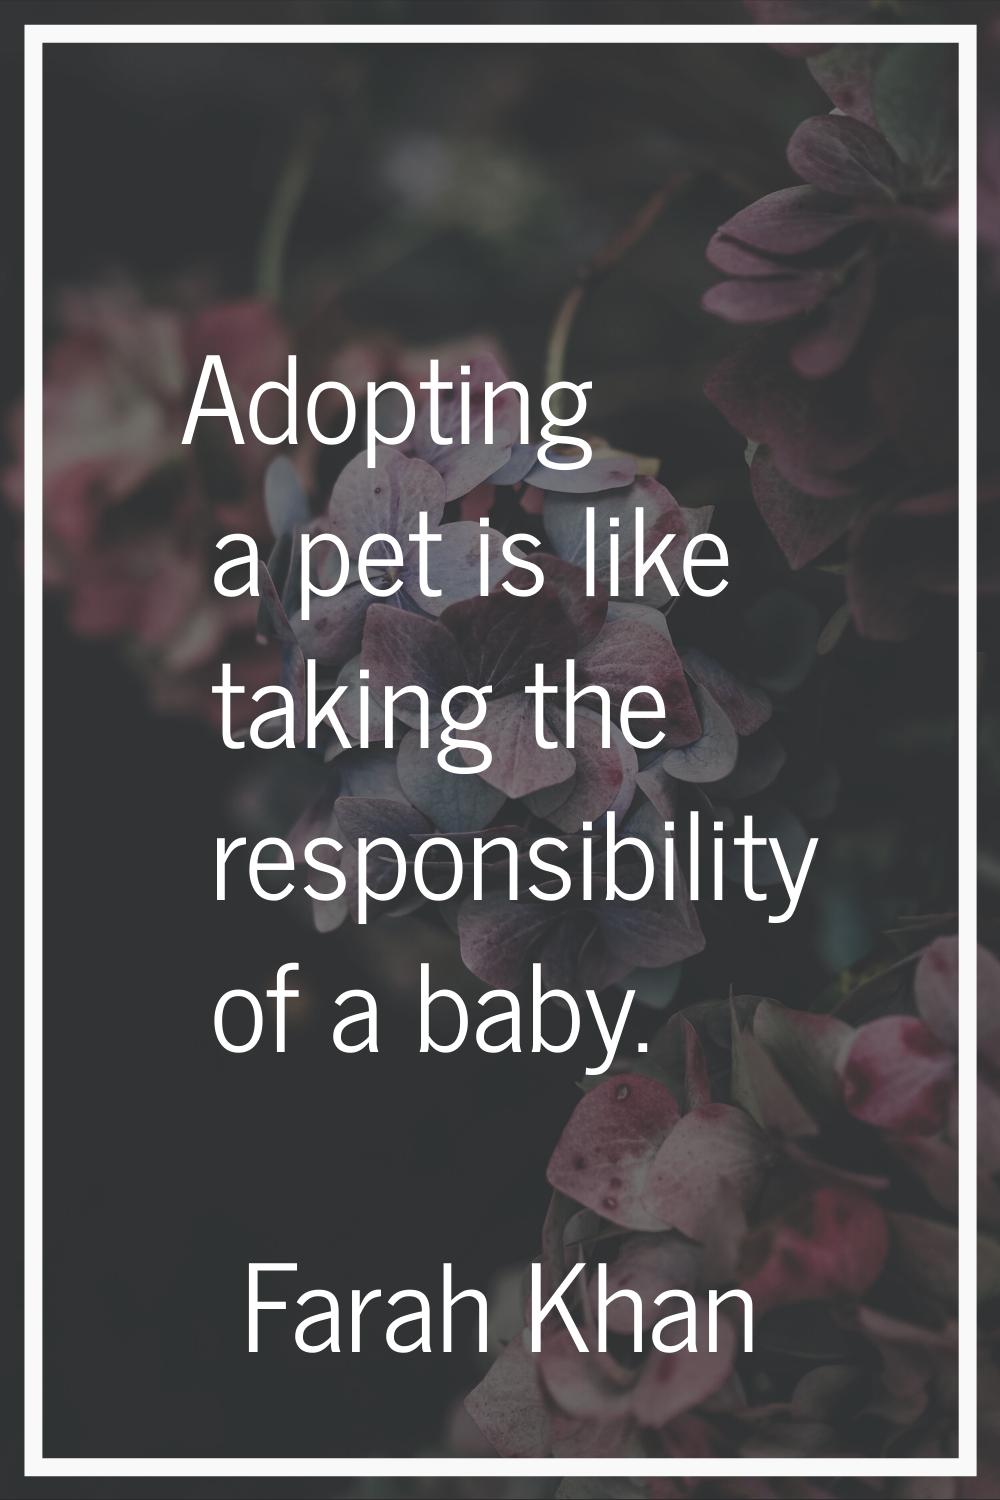 Adopting a pet is like taking the responsibility of a baby.